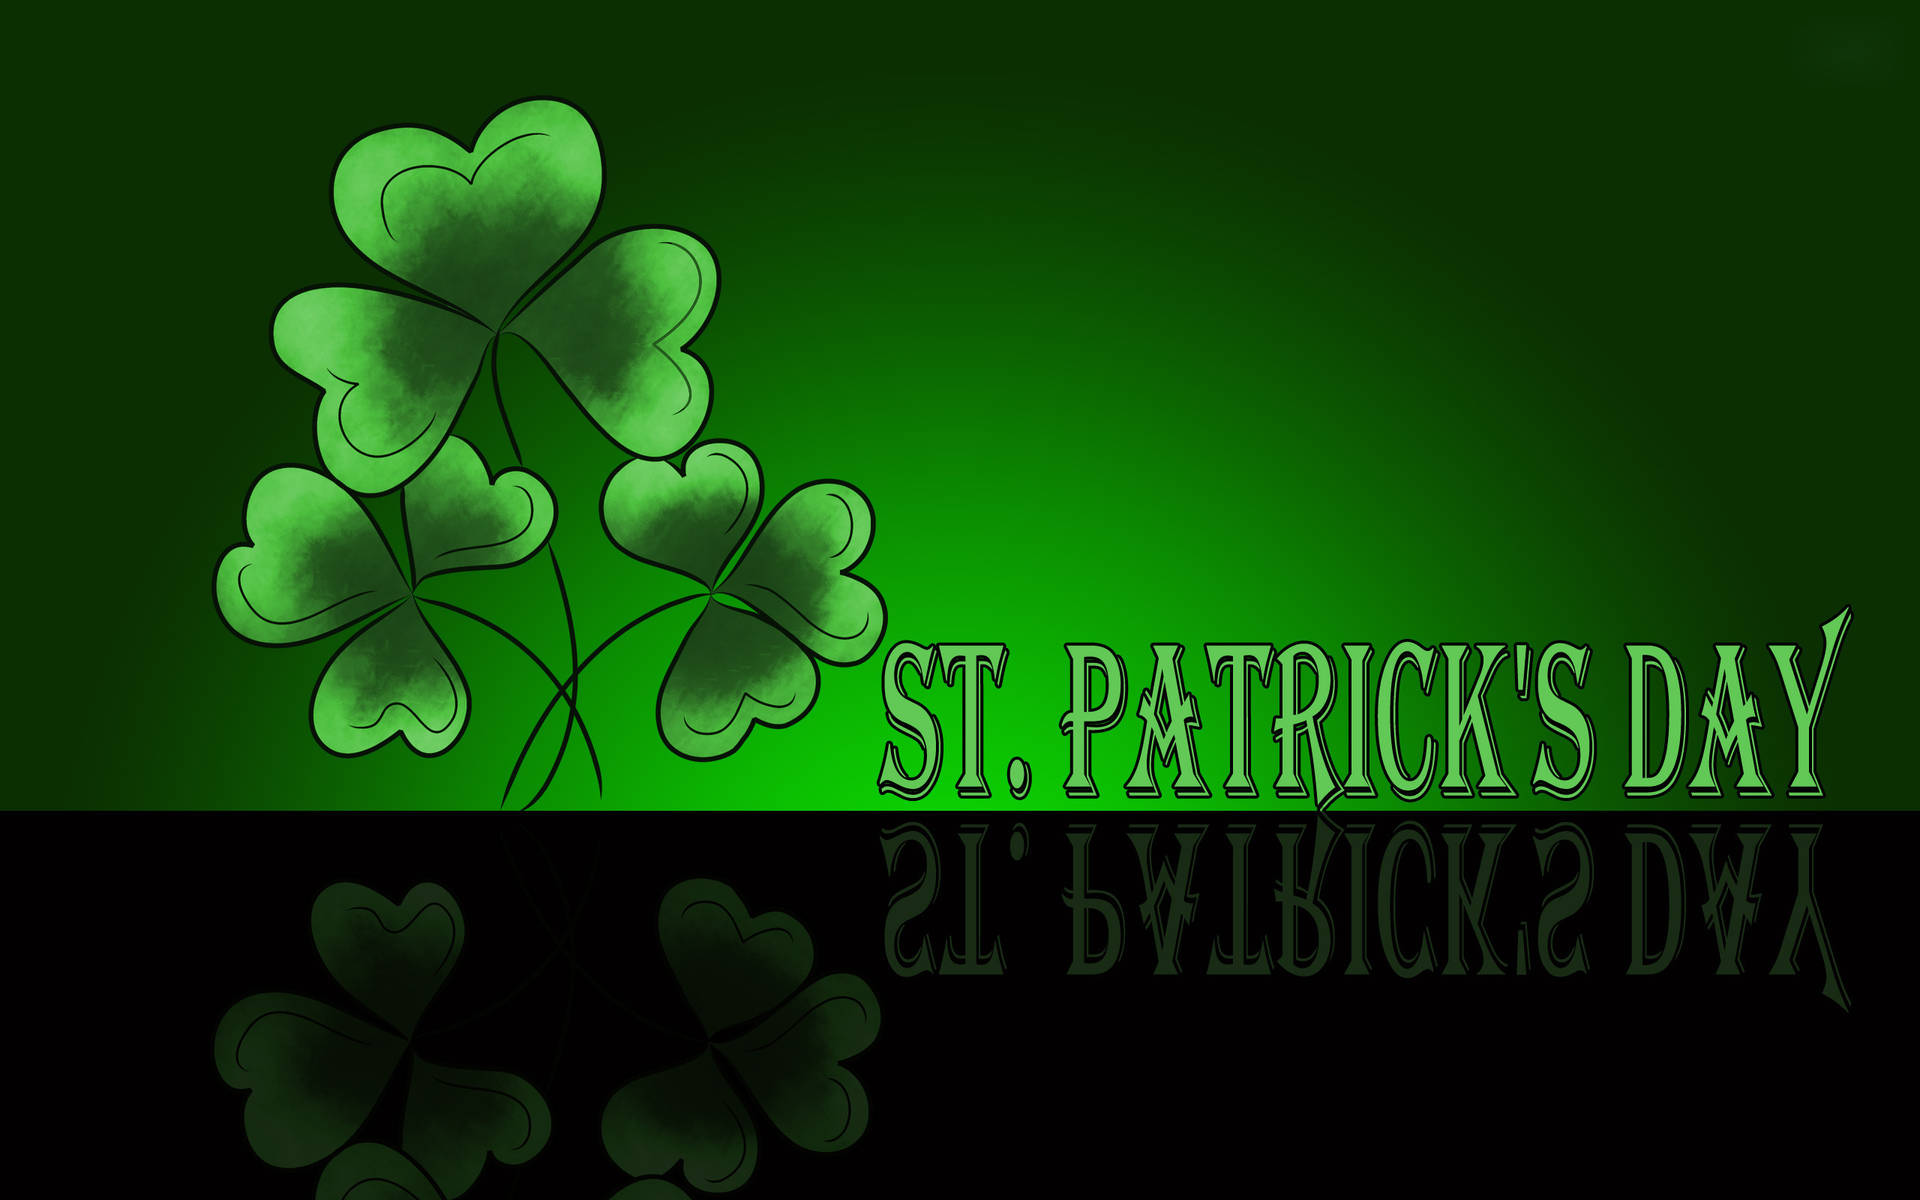 Saint Patrick’s Day On A Reflective Surface Wallpaper